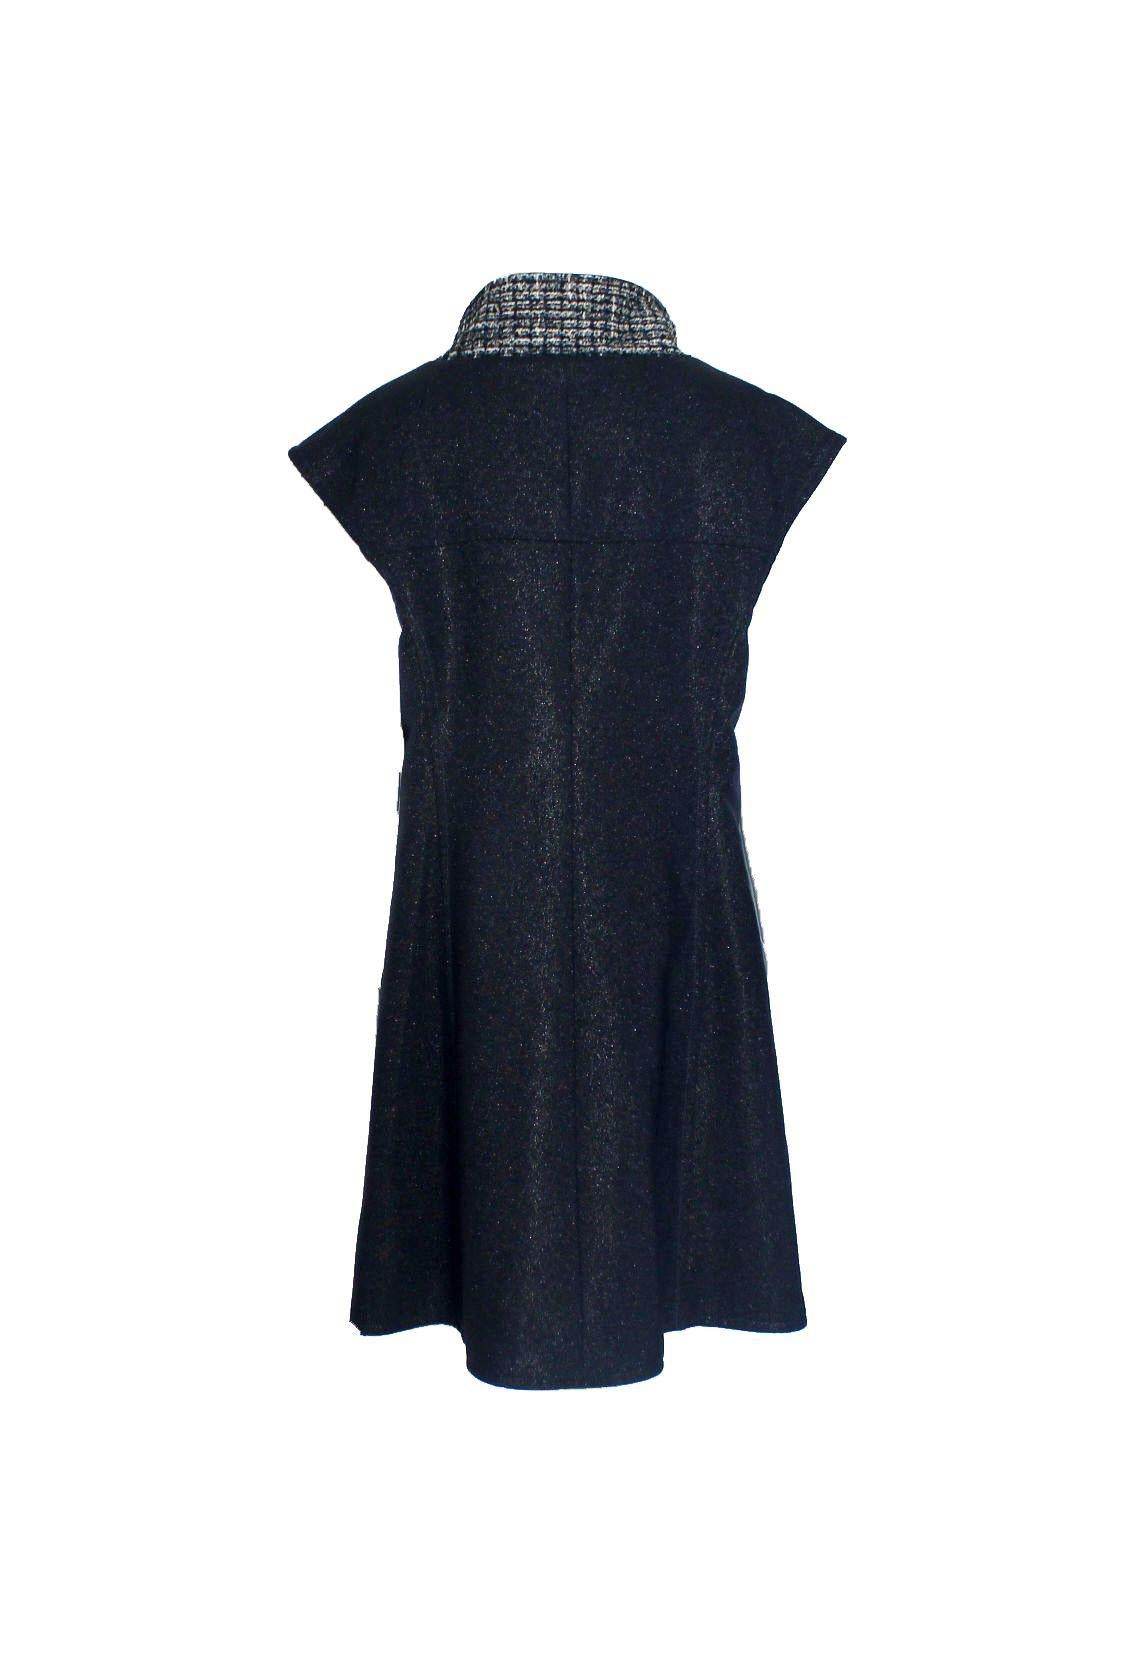 Beautiful Chanel signature piece
Fantasy tweed fabric
Two front pockets 
Such a versatile piece - can be worn as vest, jacket, dress or coat! 
Closes in front with buttons
Fully lined with beautiful tweed fabric
Chain at hem for a perfect fit
Made